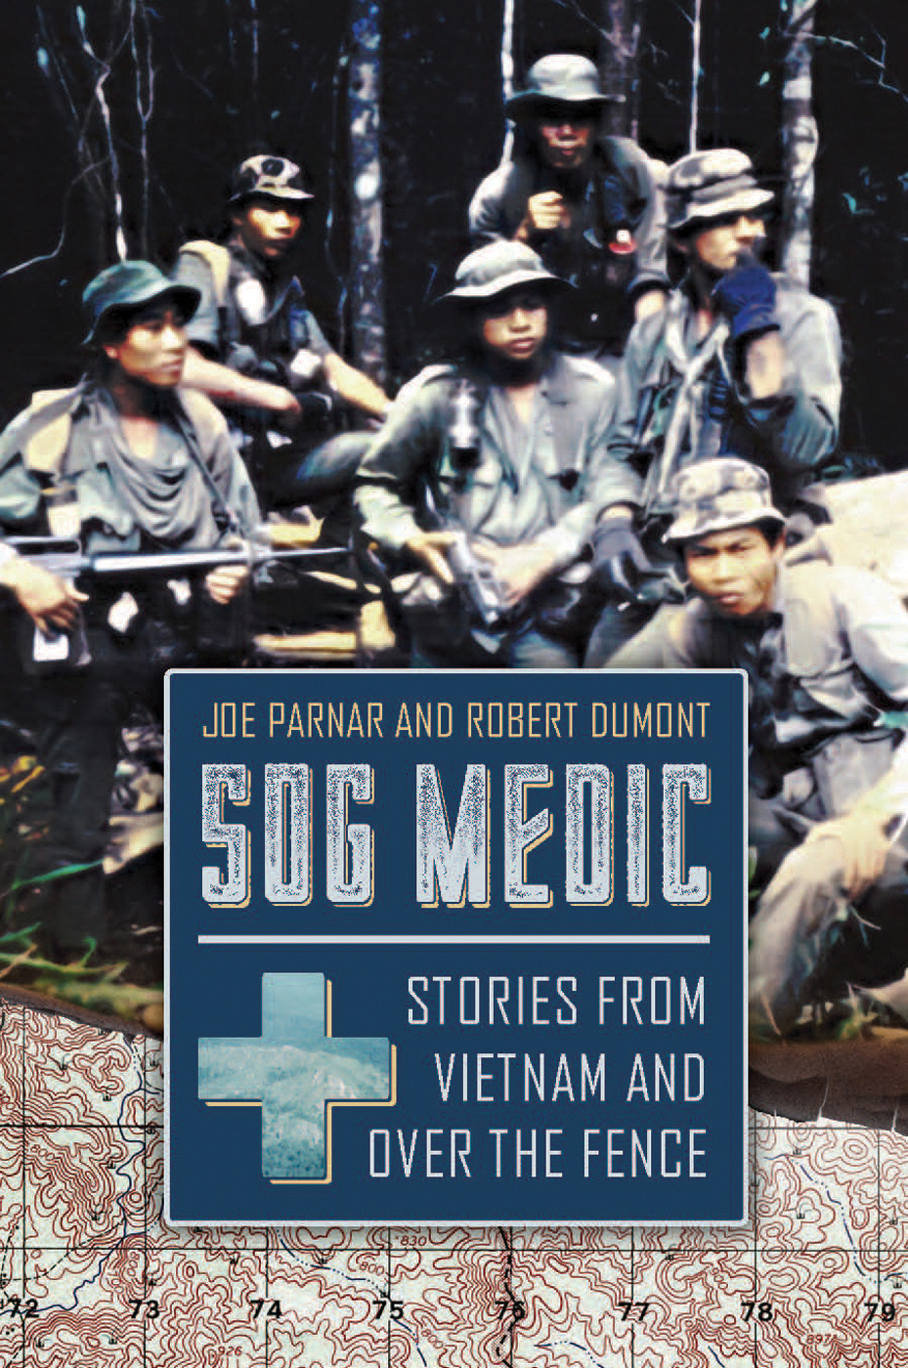 SOG Medic Stories from Vietnam and Over the Fence - image 1